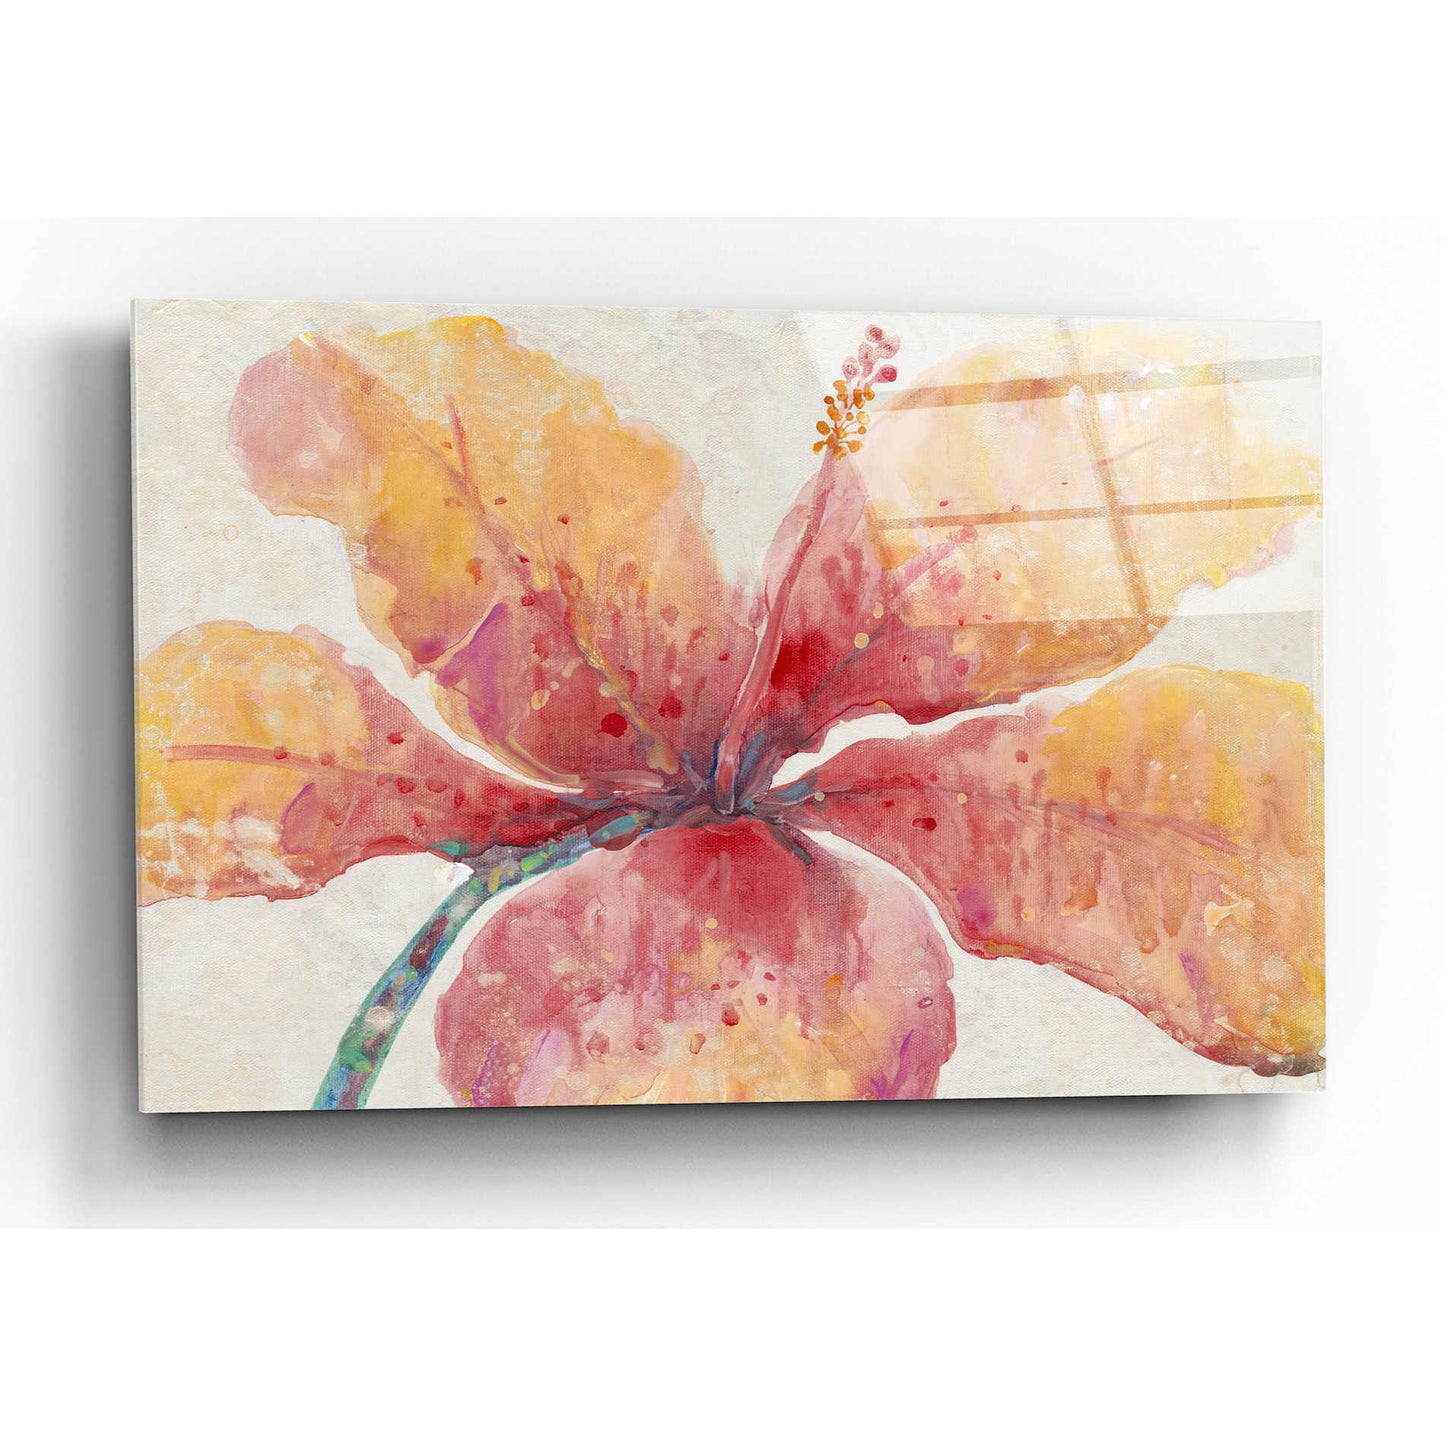 Epic Art 'Blooming Hibiscus' by Tim O'Toole, Acrylic Glass Wall Art,24x16